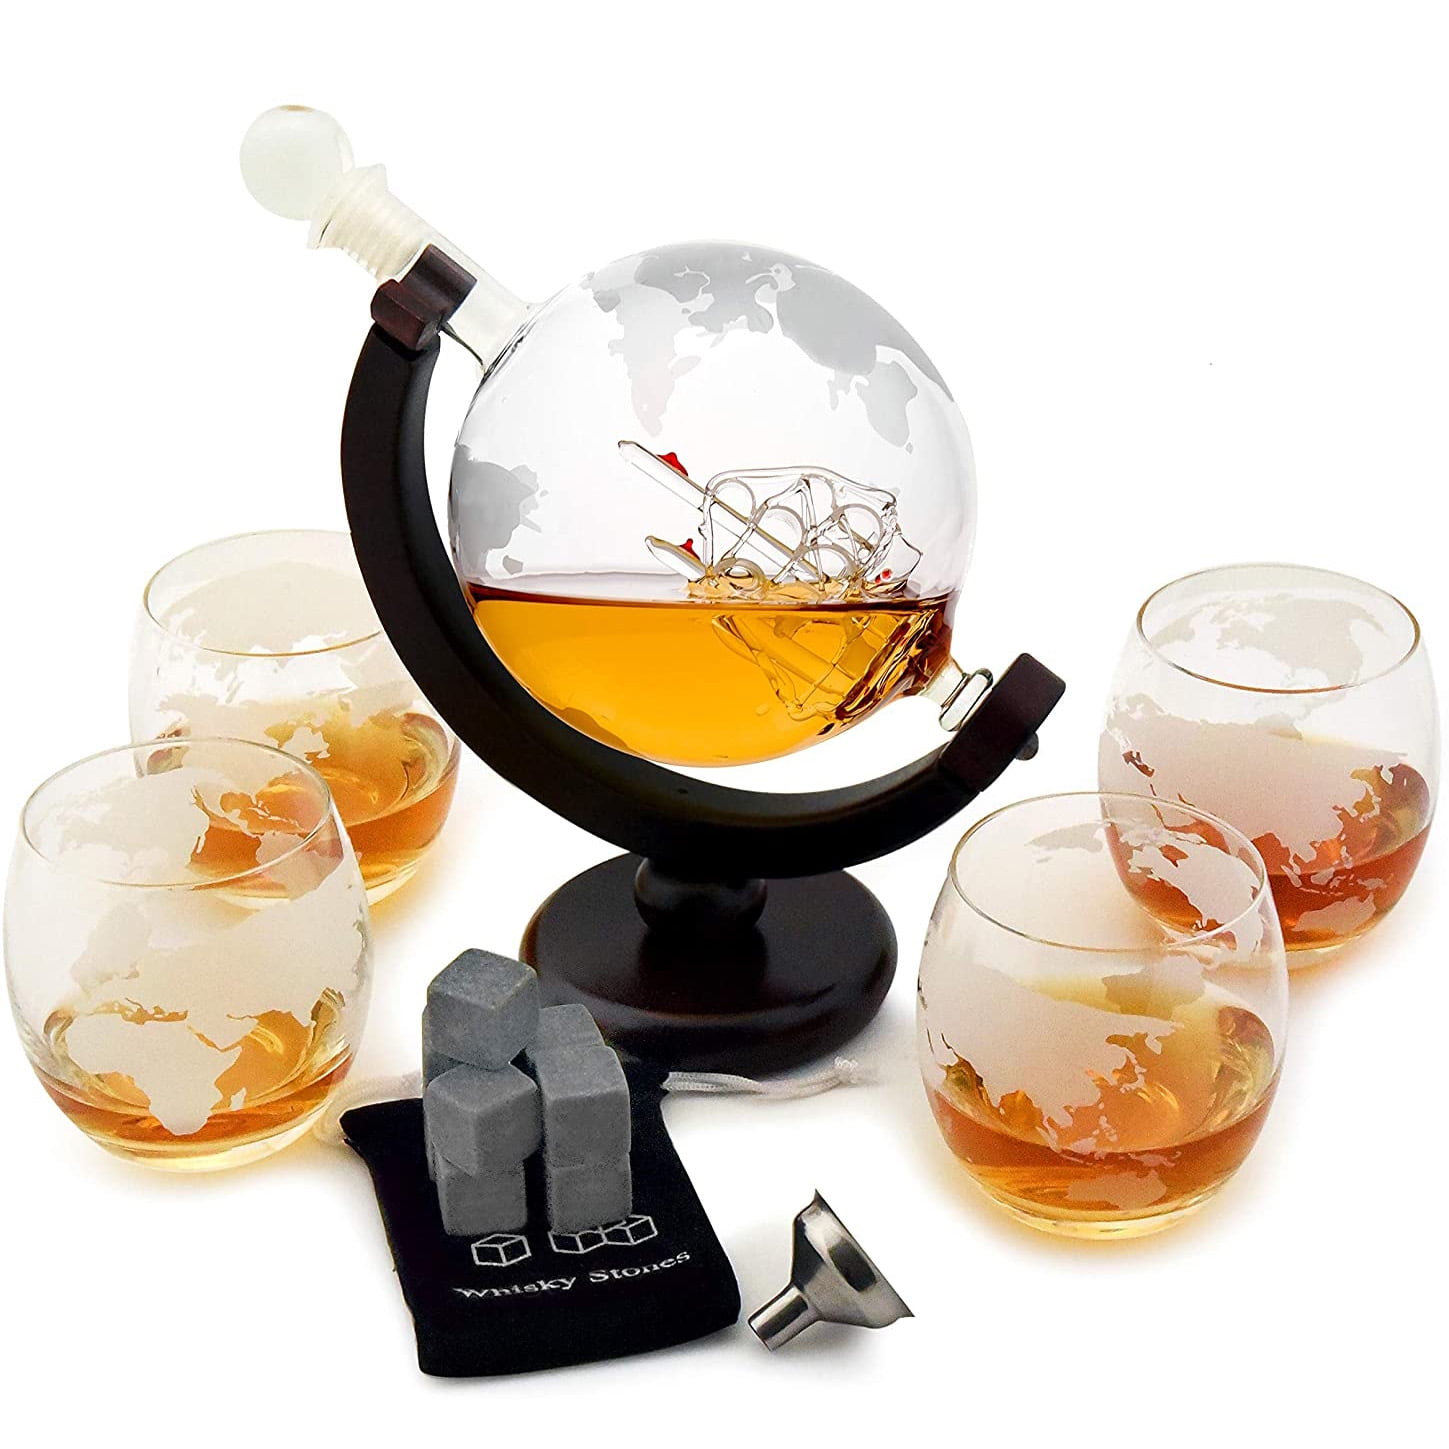 Viski Globe Stainless Steel Cocktail Shaker with Etched Map and Compass -  Drink Mixers for Cocktails & Bar Shaker - 32 Oz